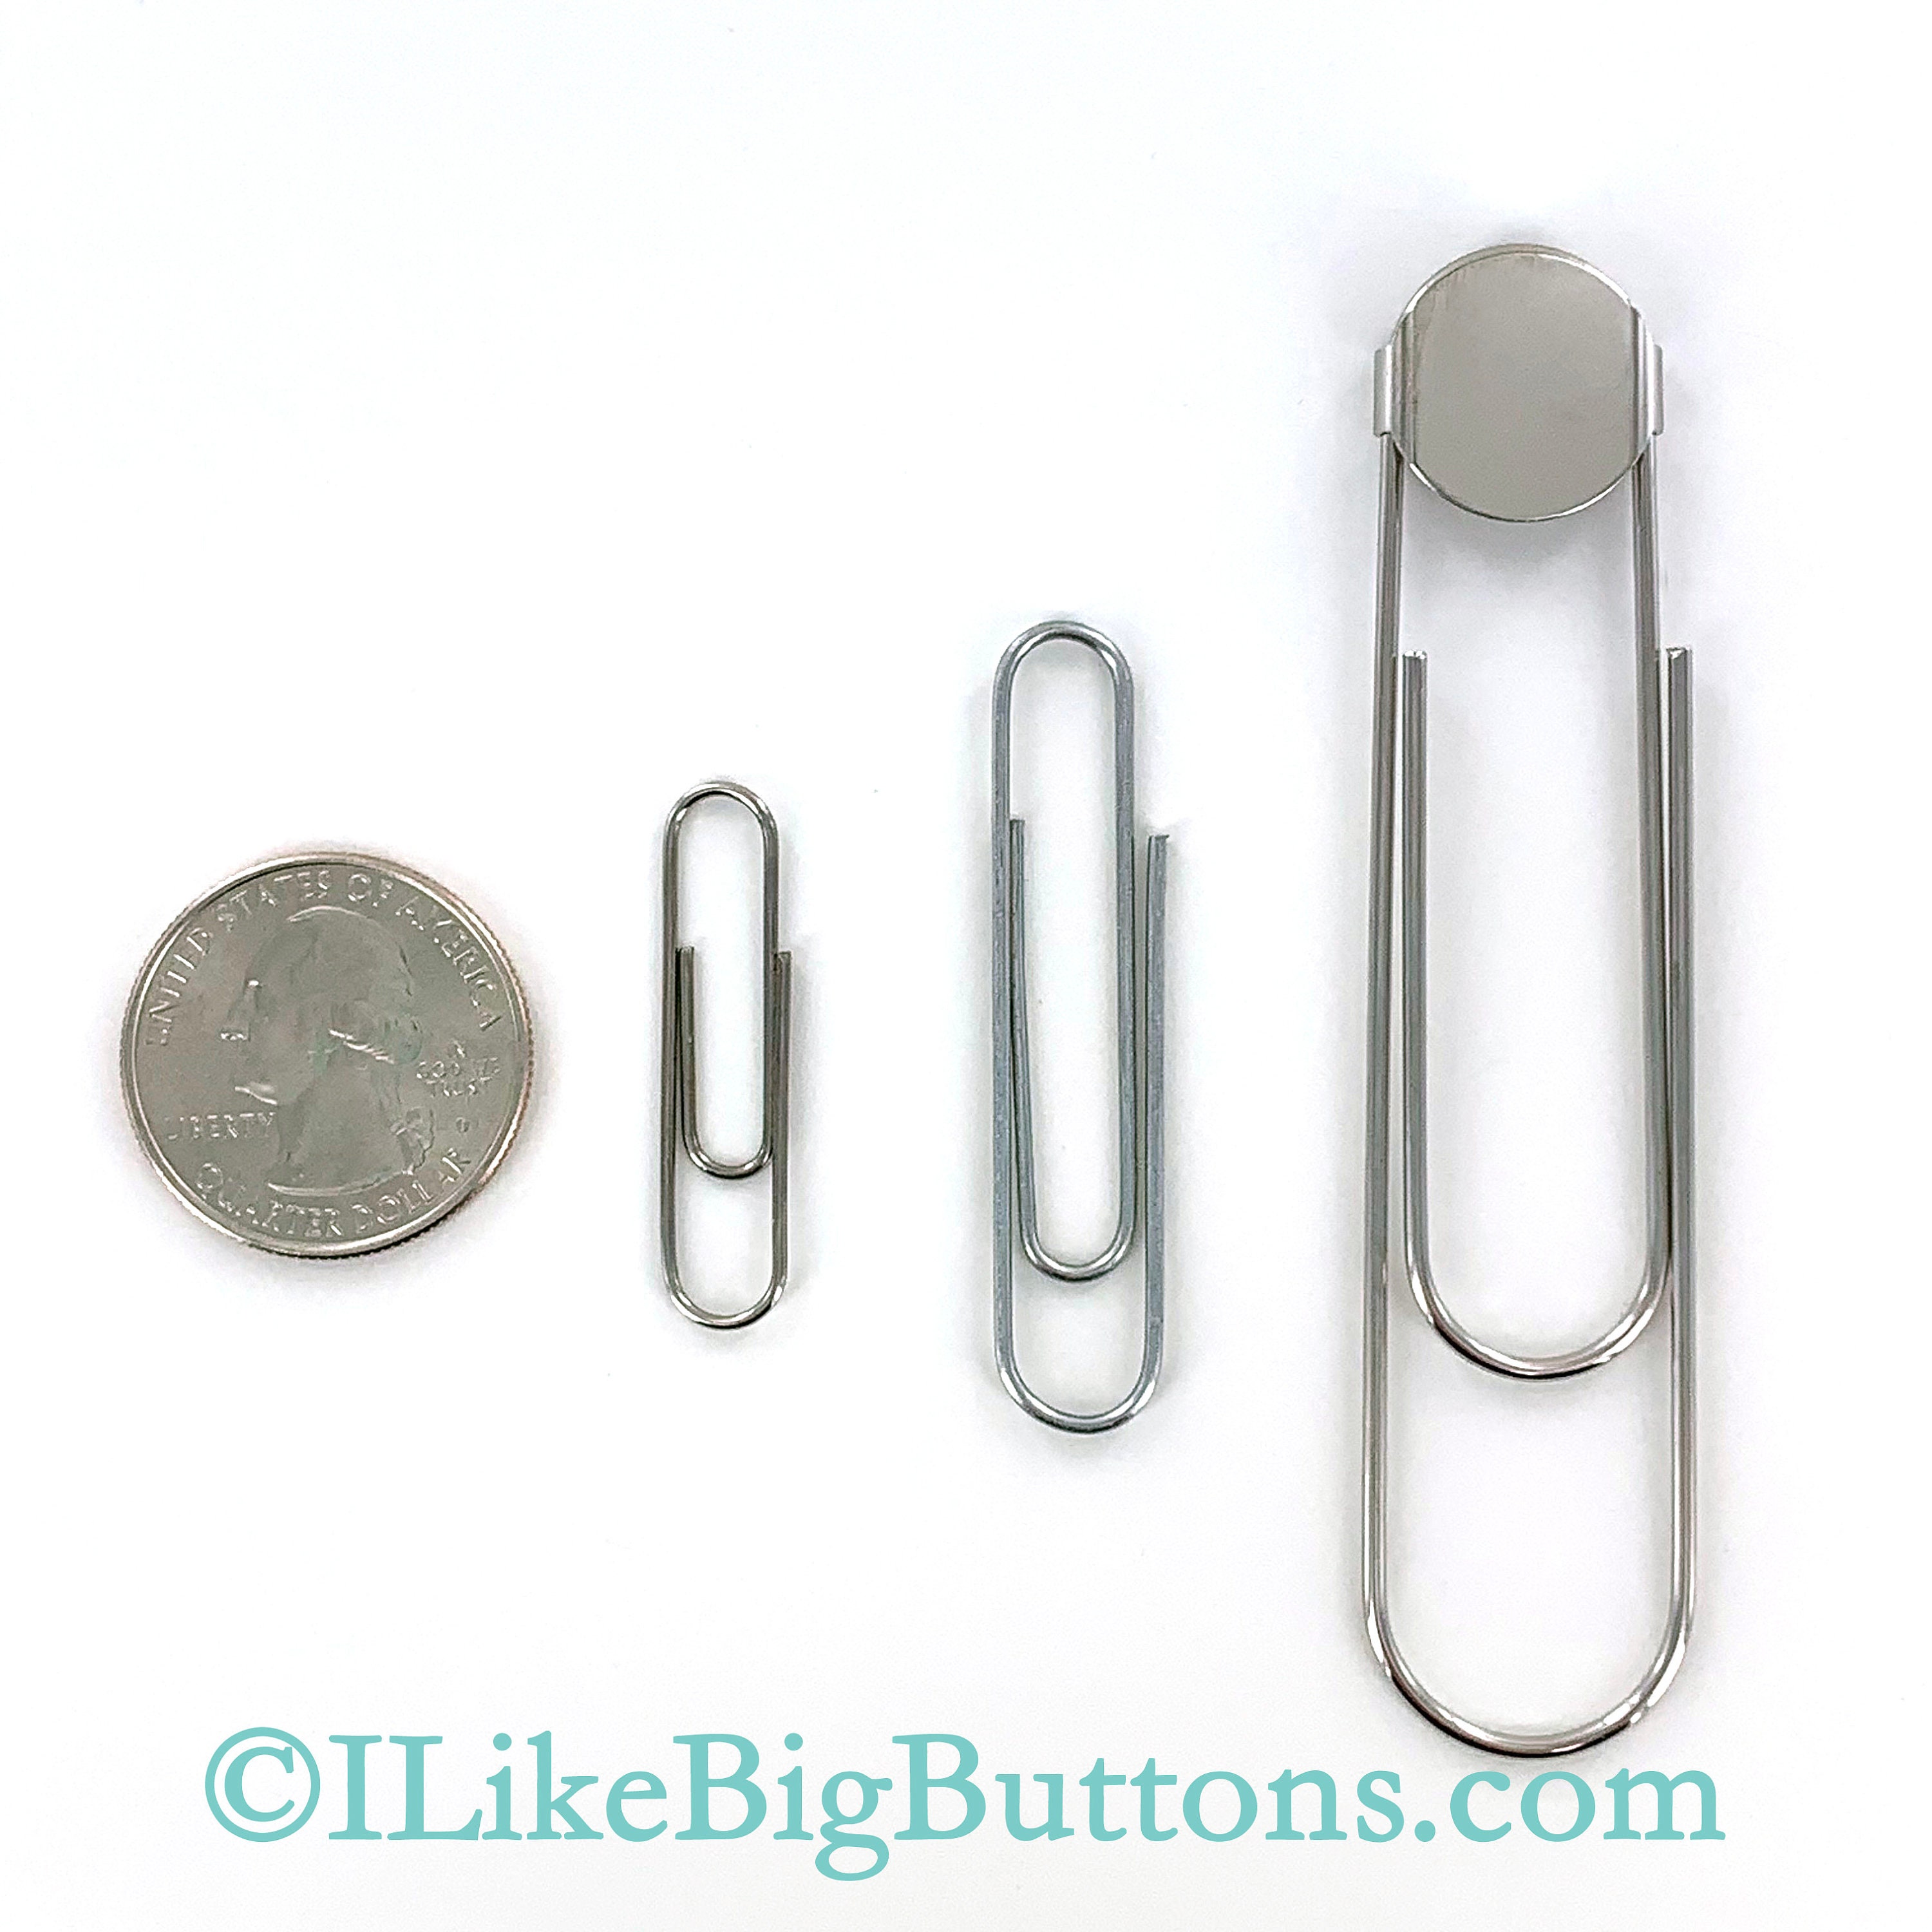 25 Large Paper Clip Bookmarkers With Glue Pad 3 1/2 Inch SEE